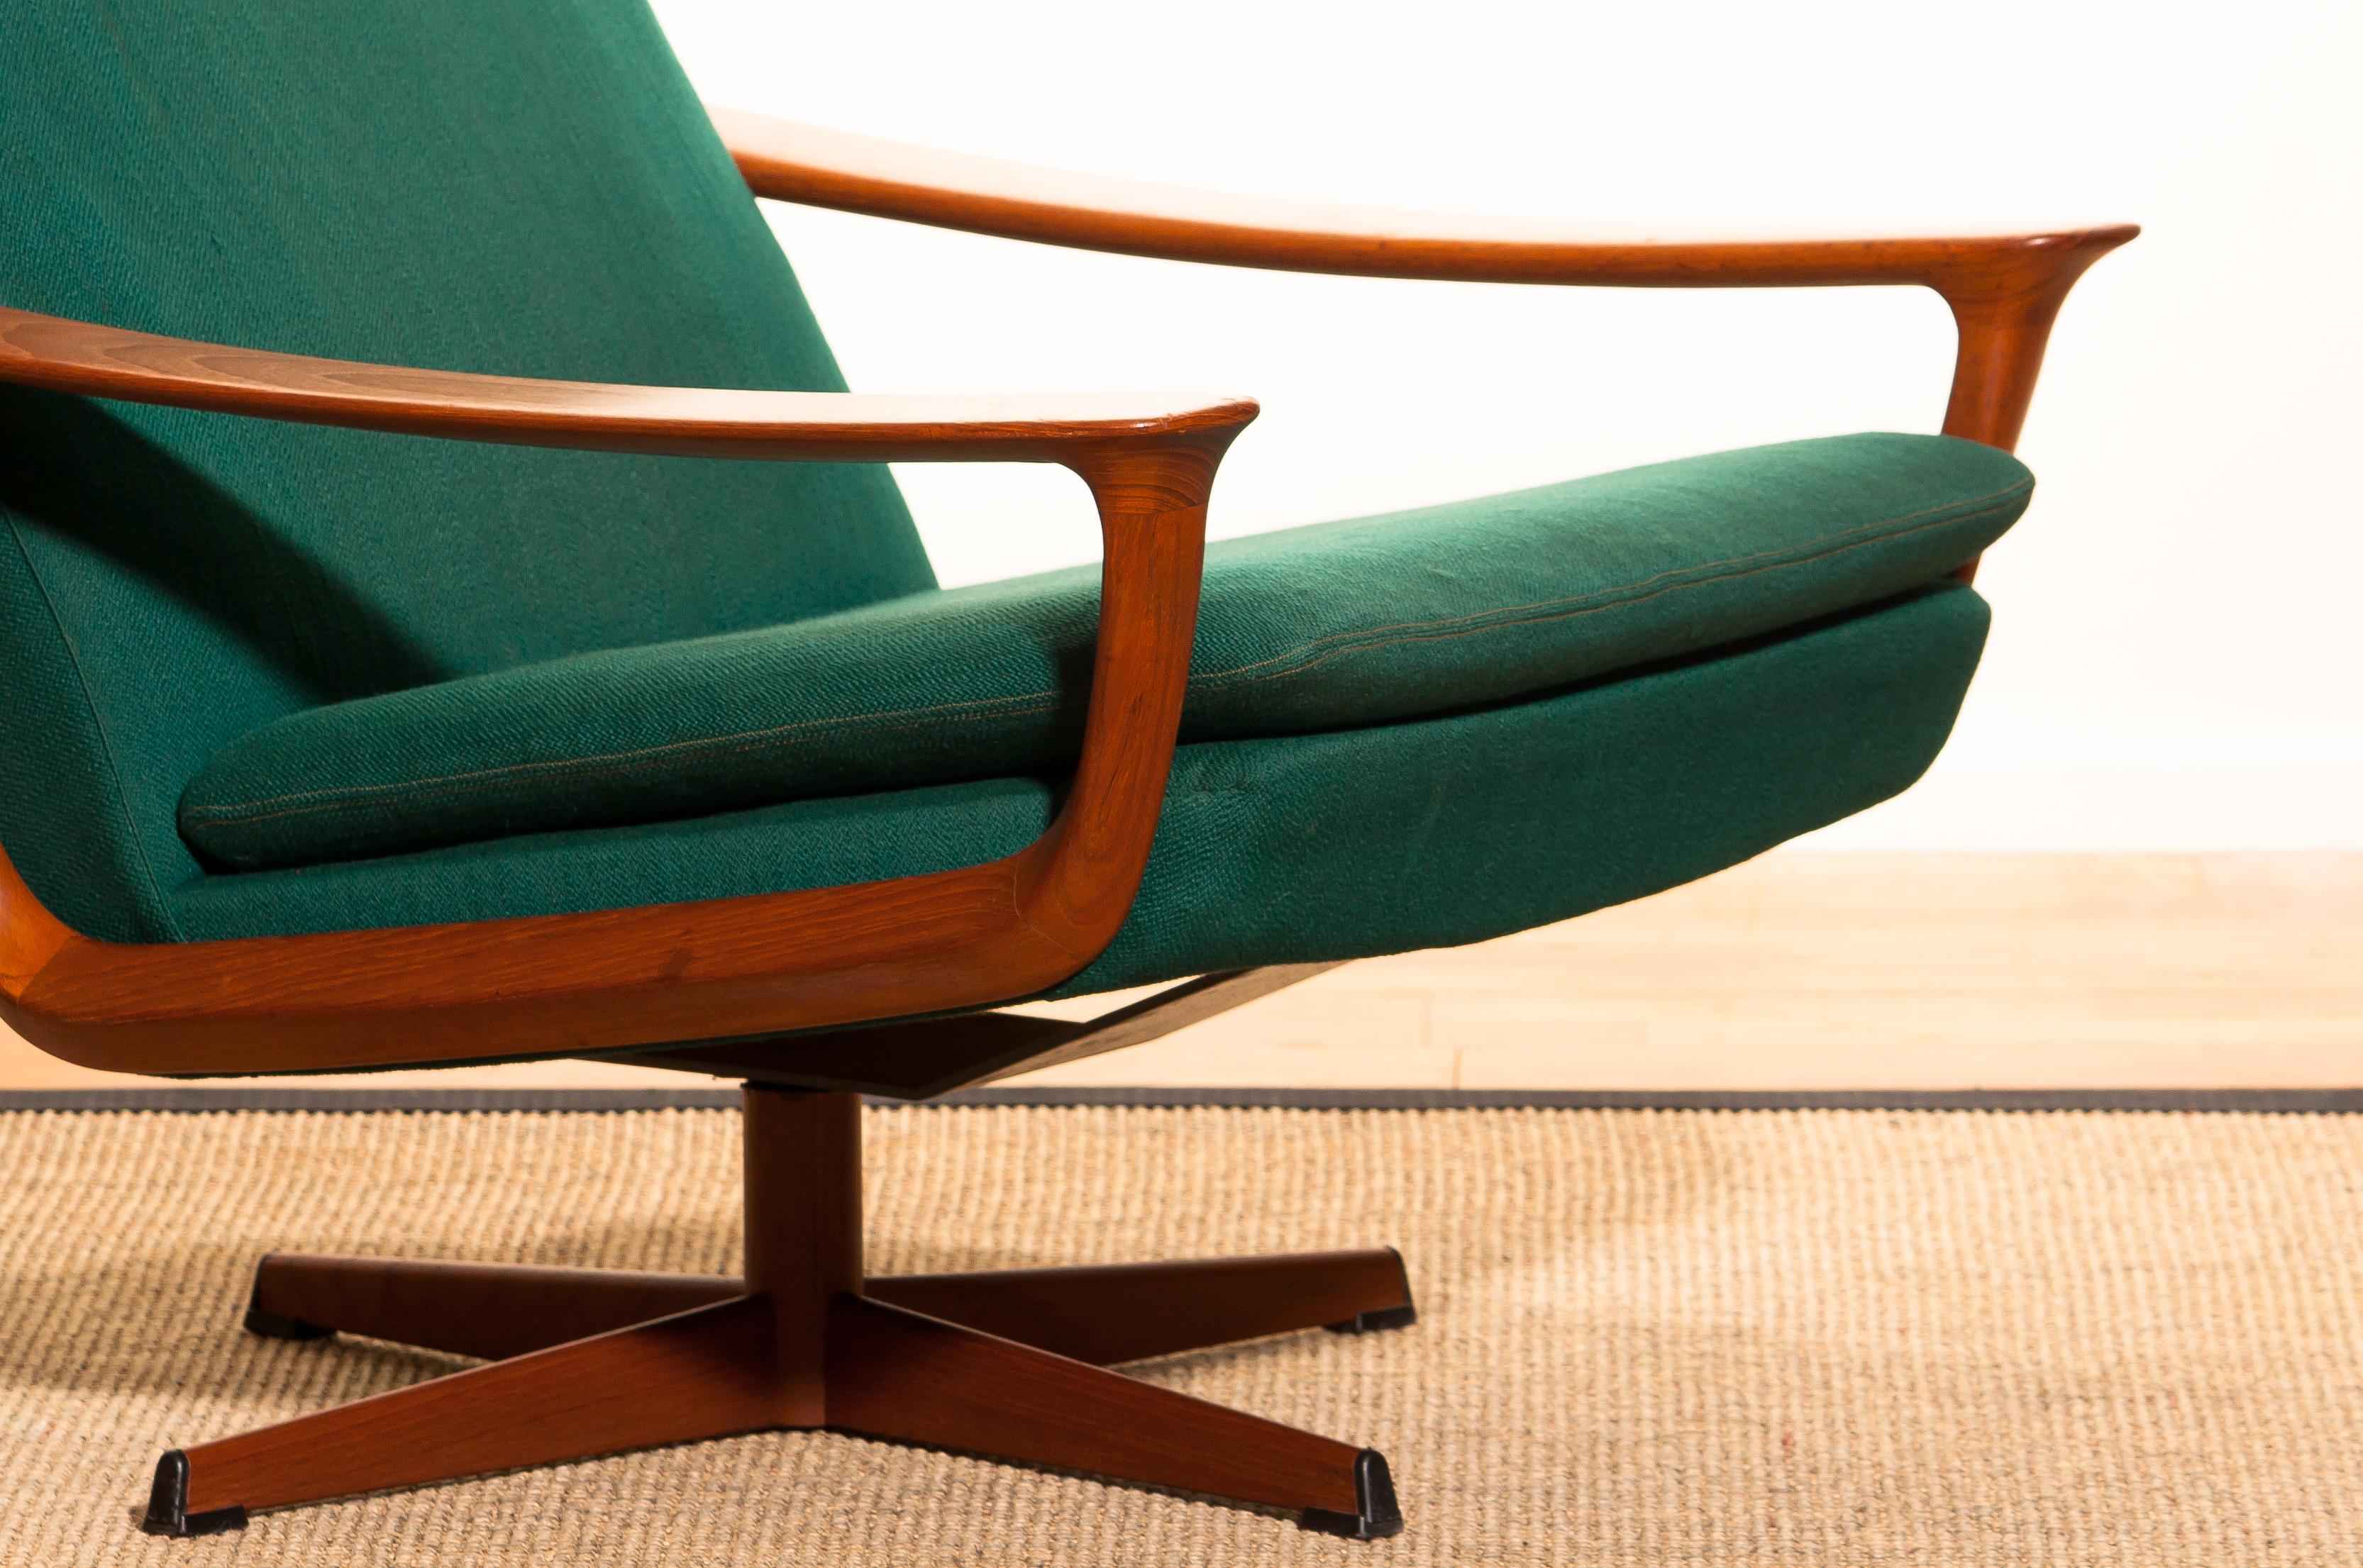 1960s, Teak Set of Two Swivel Chairs by Johannes Andersson for Trensum Denmark 9